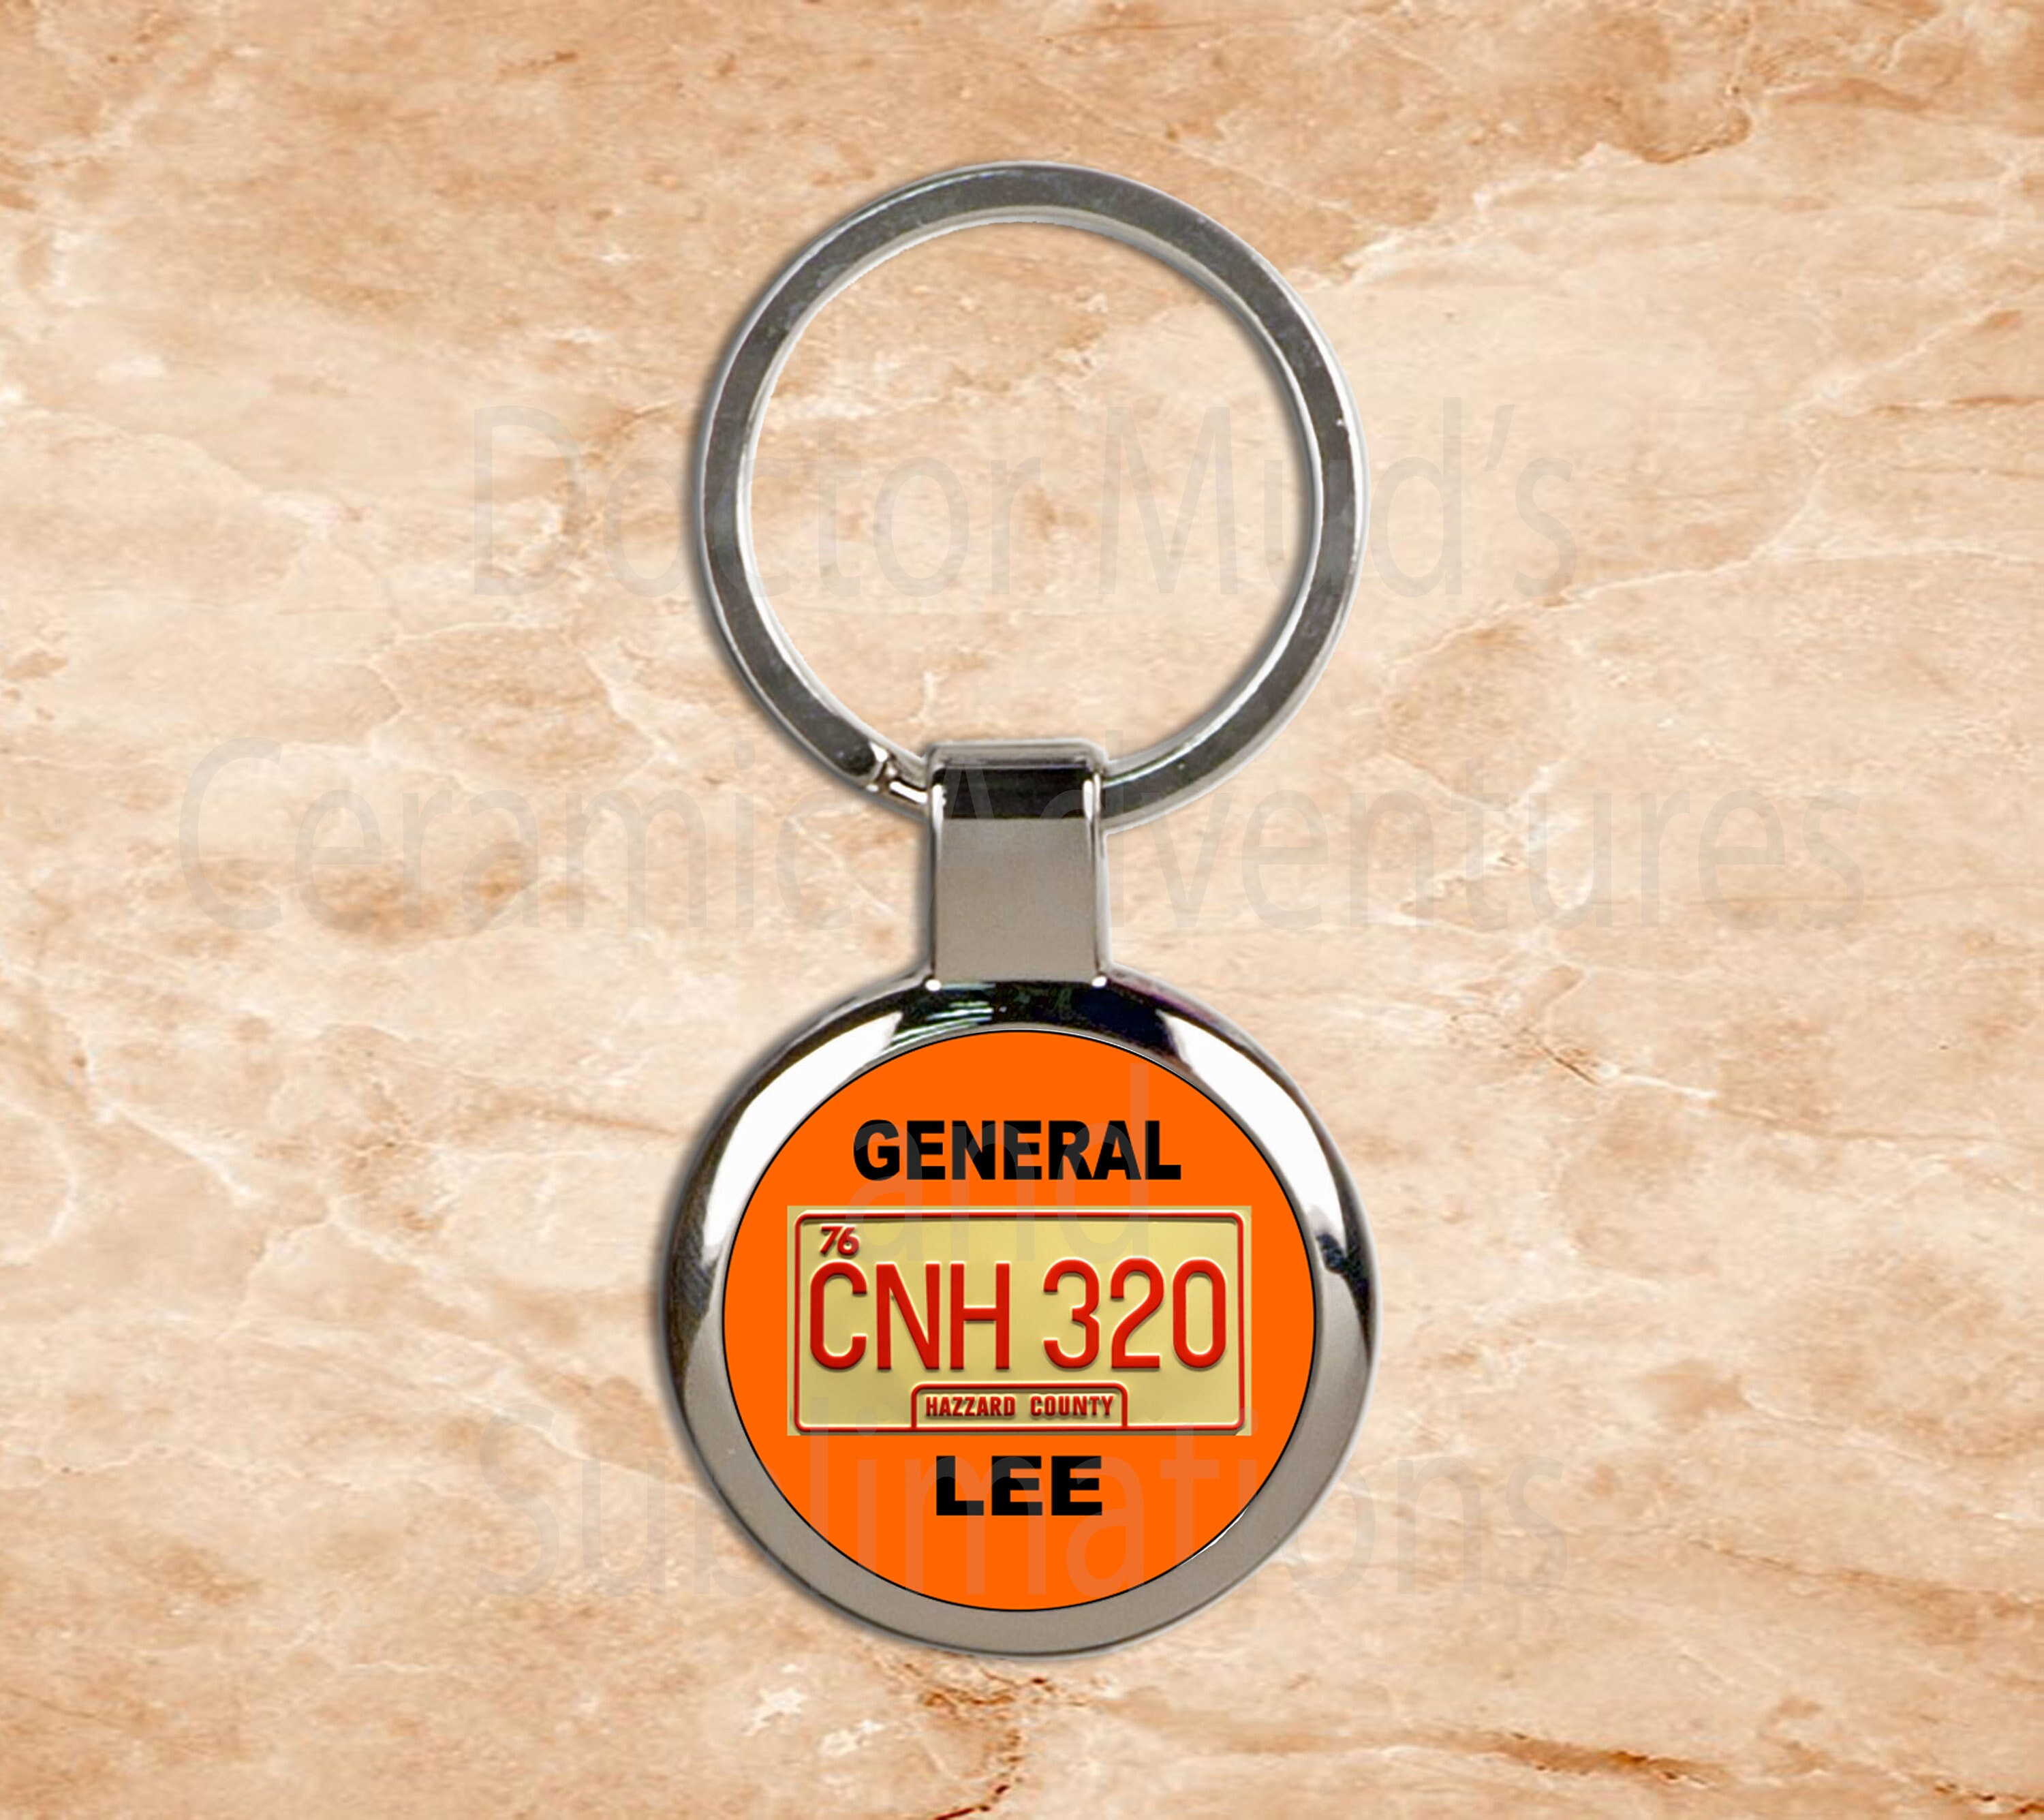 General Men's Keyrings & Keychains - Best Prices in Egypt